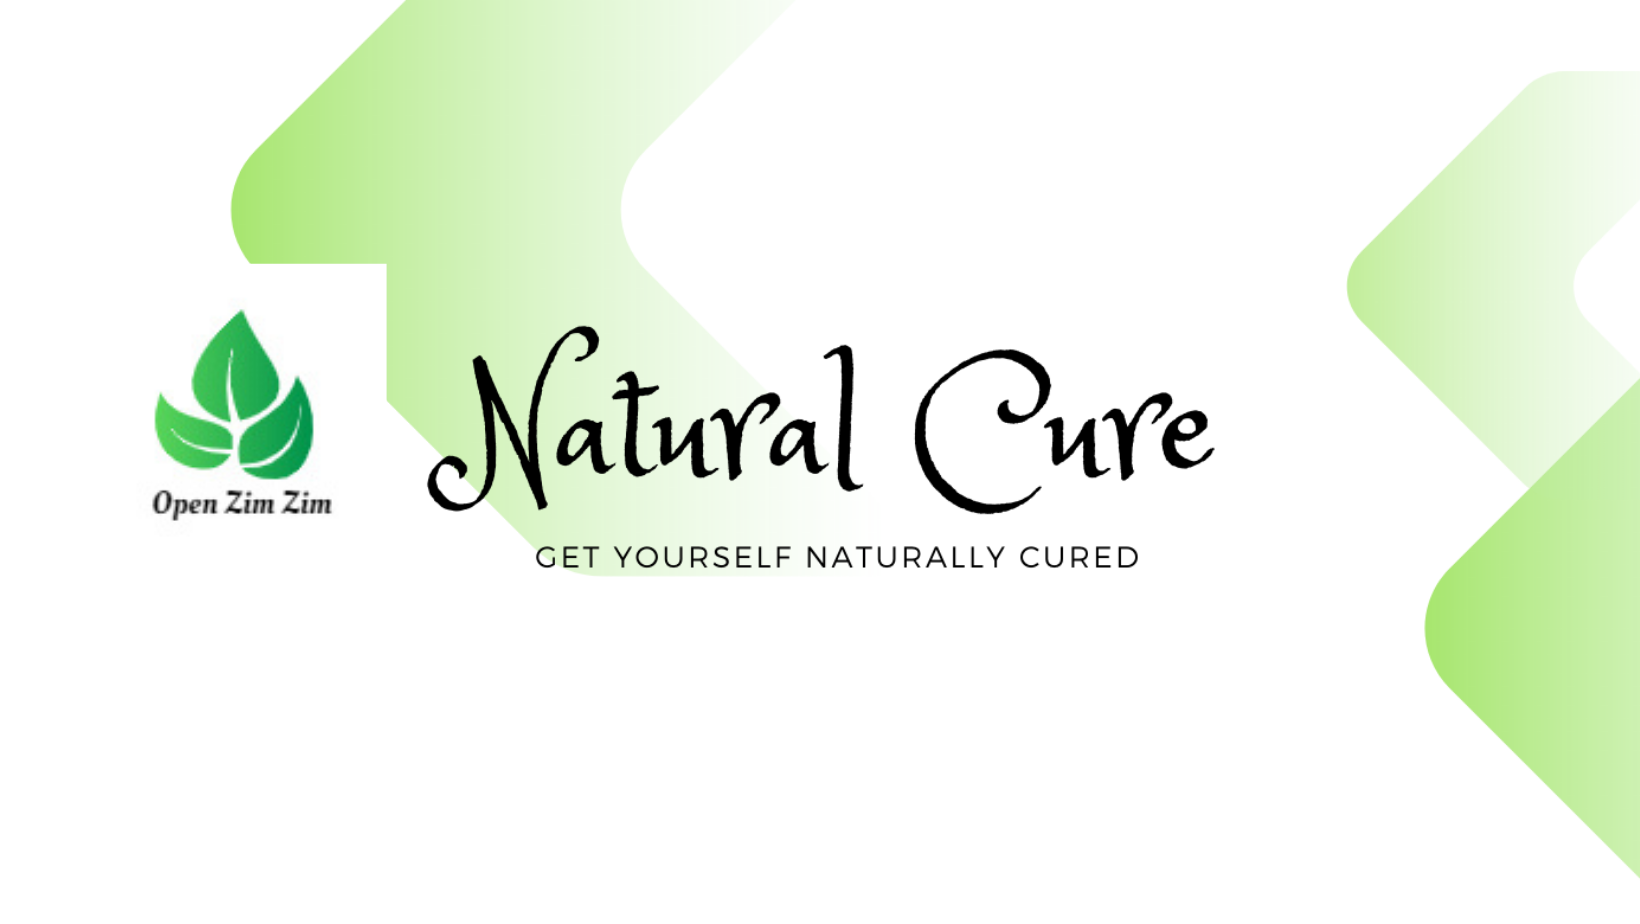 Natural cure